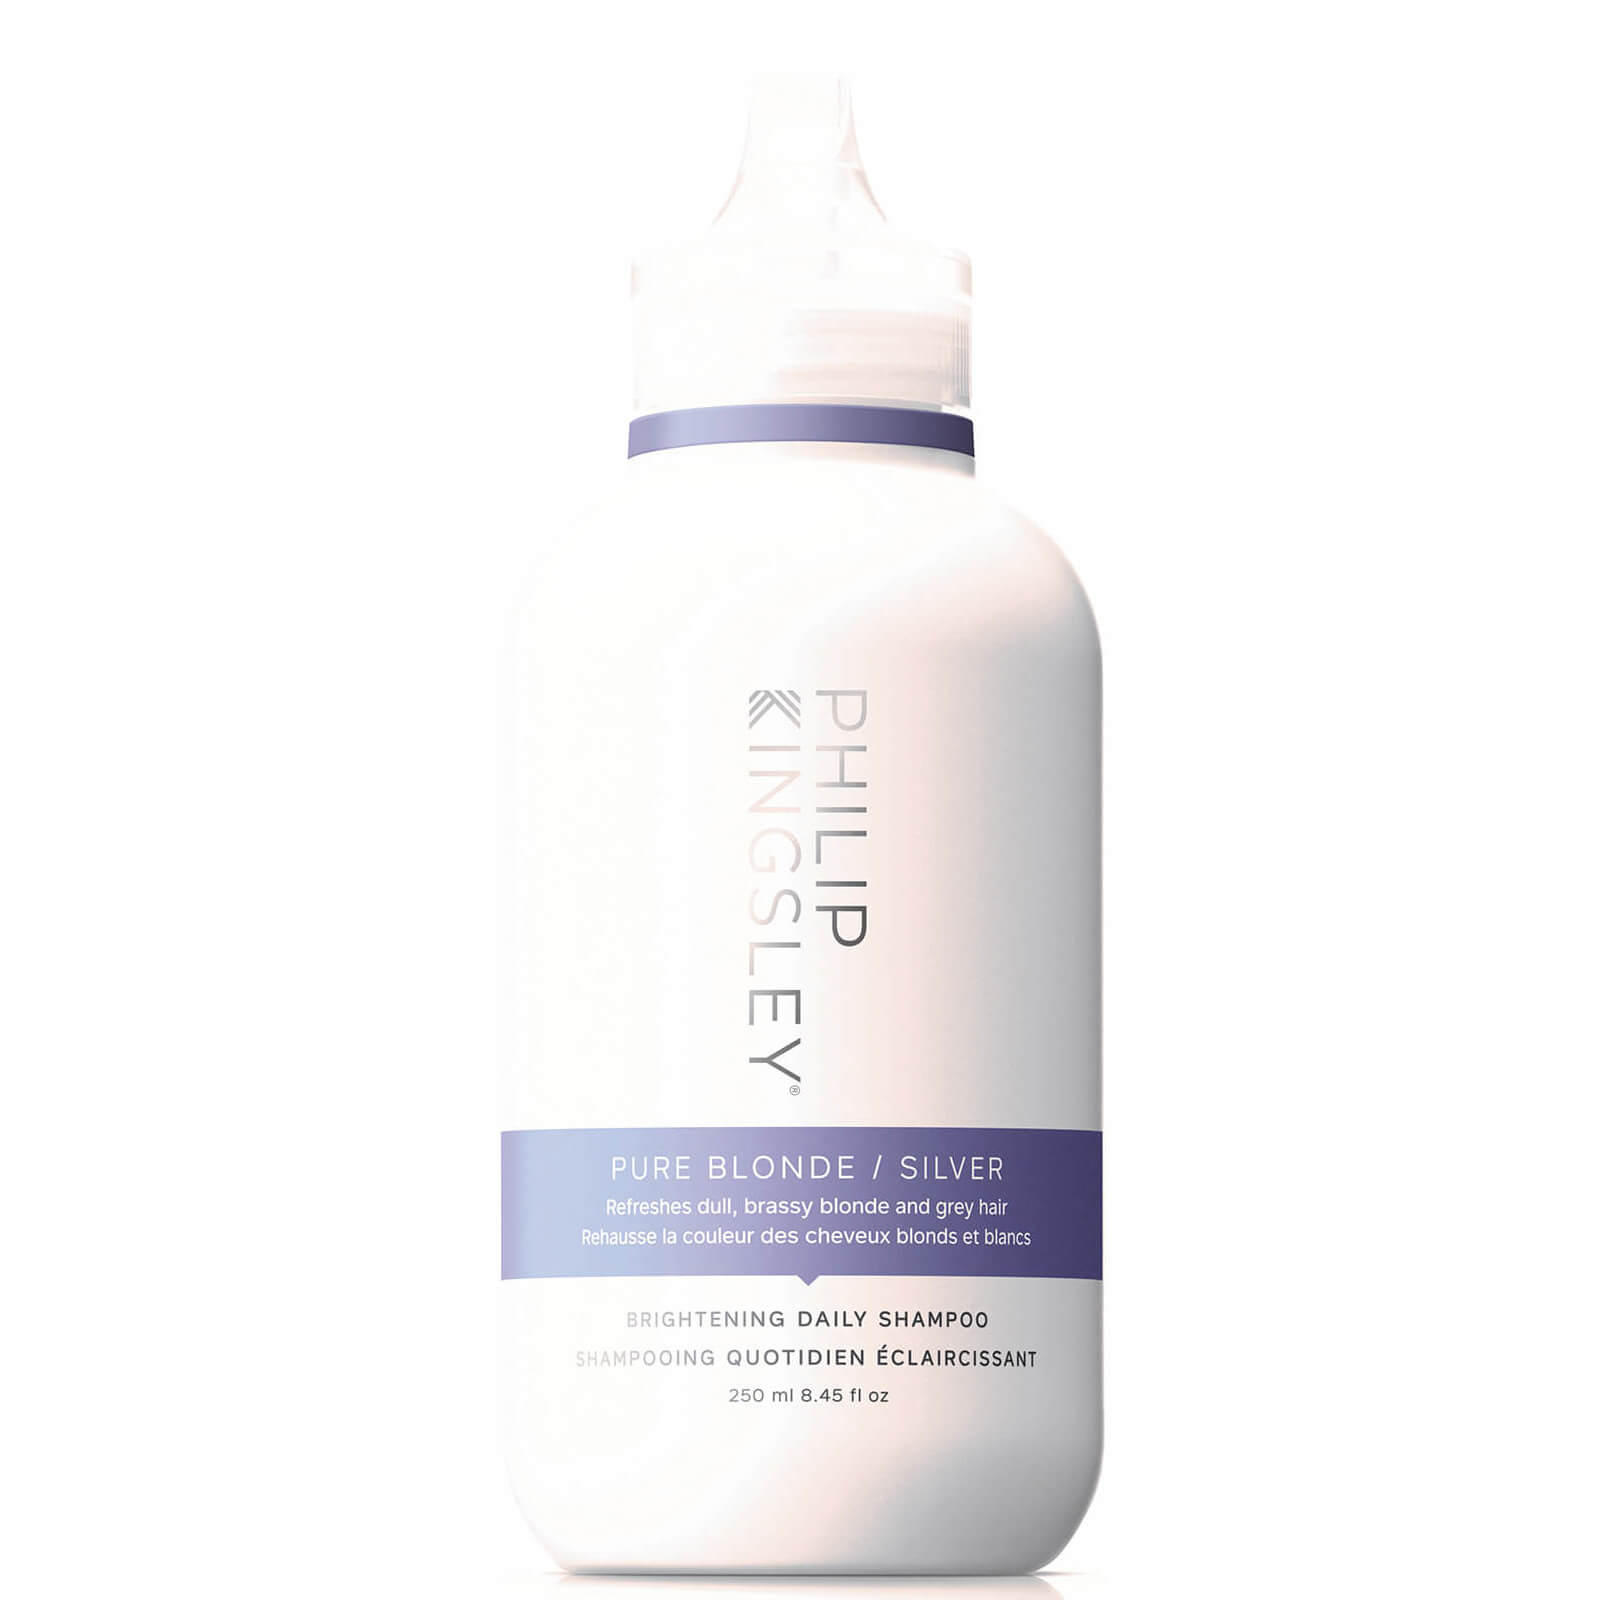 Look Fantastic coupon: Philip Kingsley Pure Blonde/Silver Brightening Daily Shampoo 8.5oz